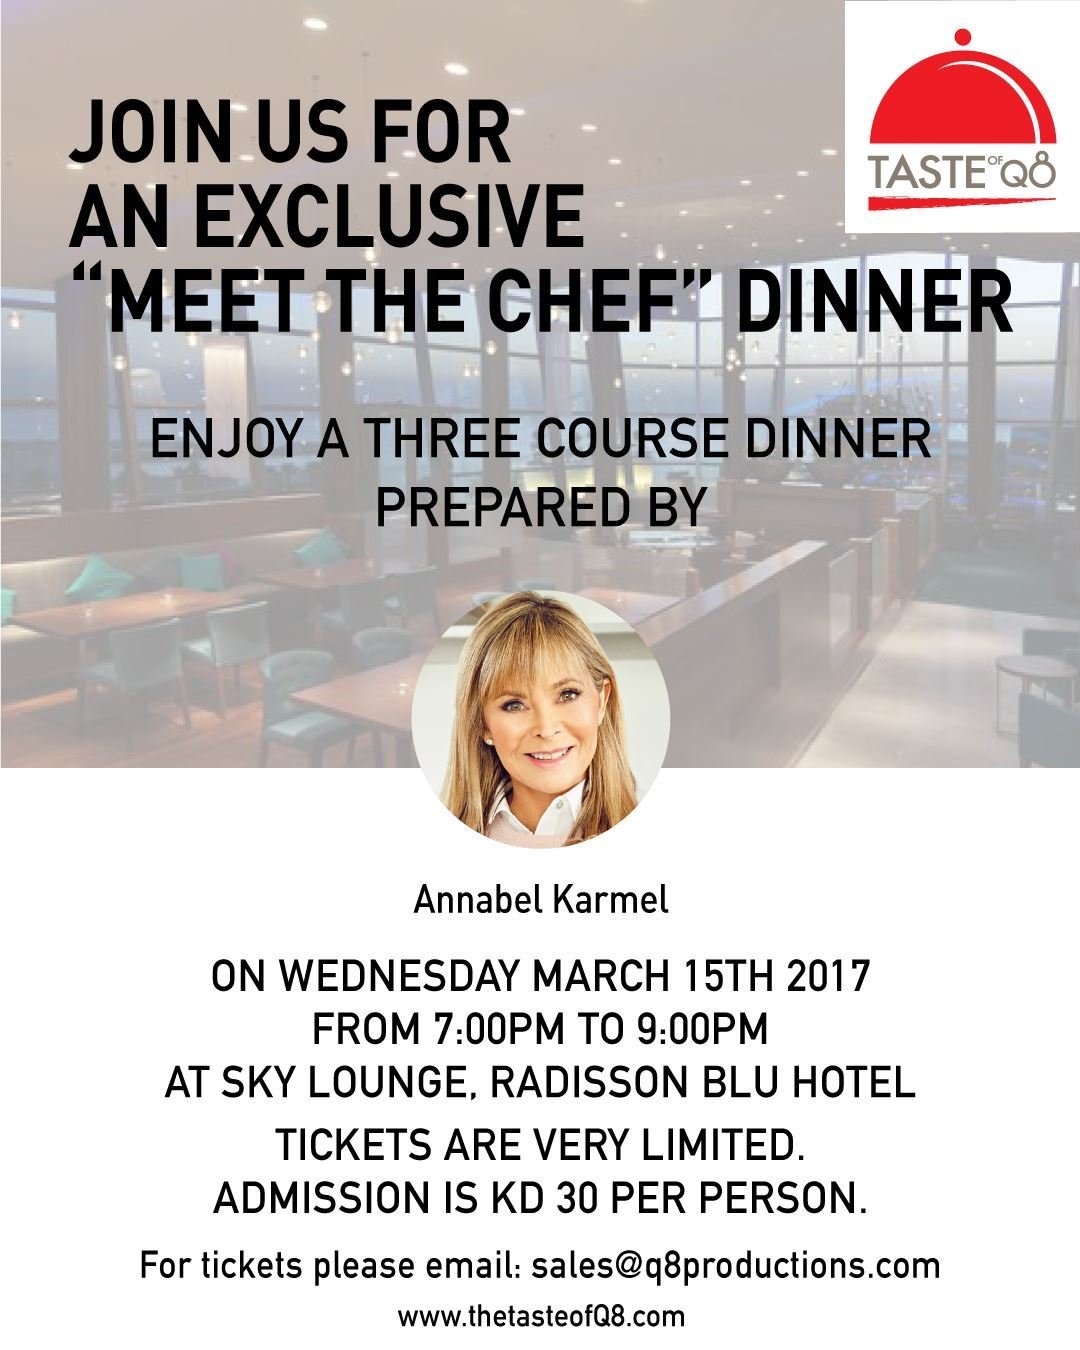 An Exclusive "Meet The Chef" Dinner - by Annabel Karmel